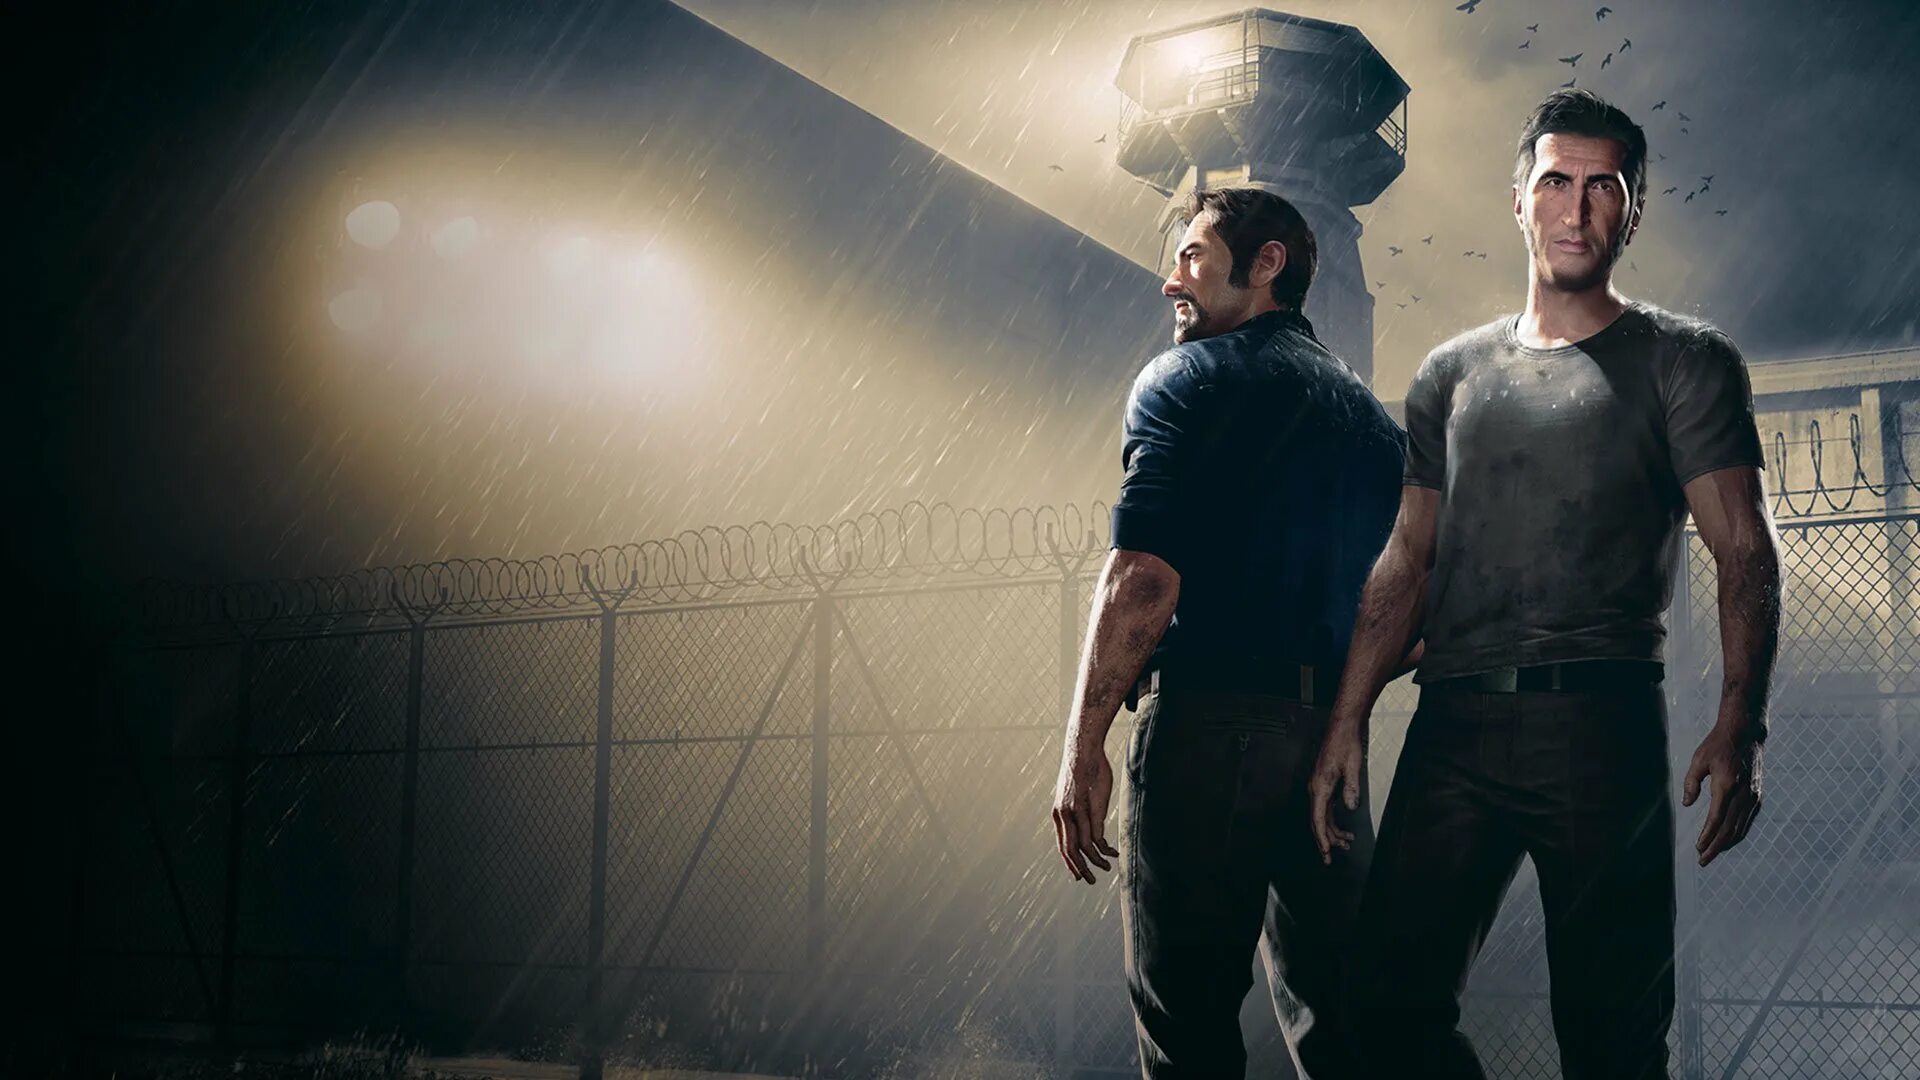 Easy away. A way out ps4 геймплей. Лео из игры a way out. A way out Винсент. A way out обложка.